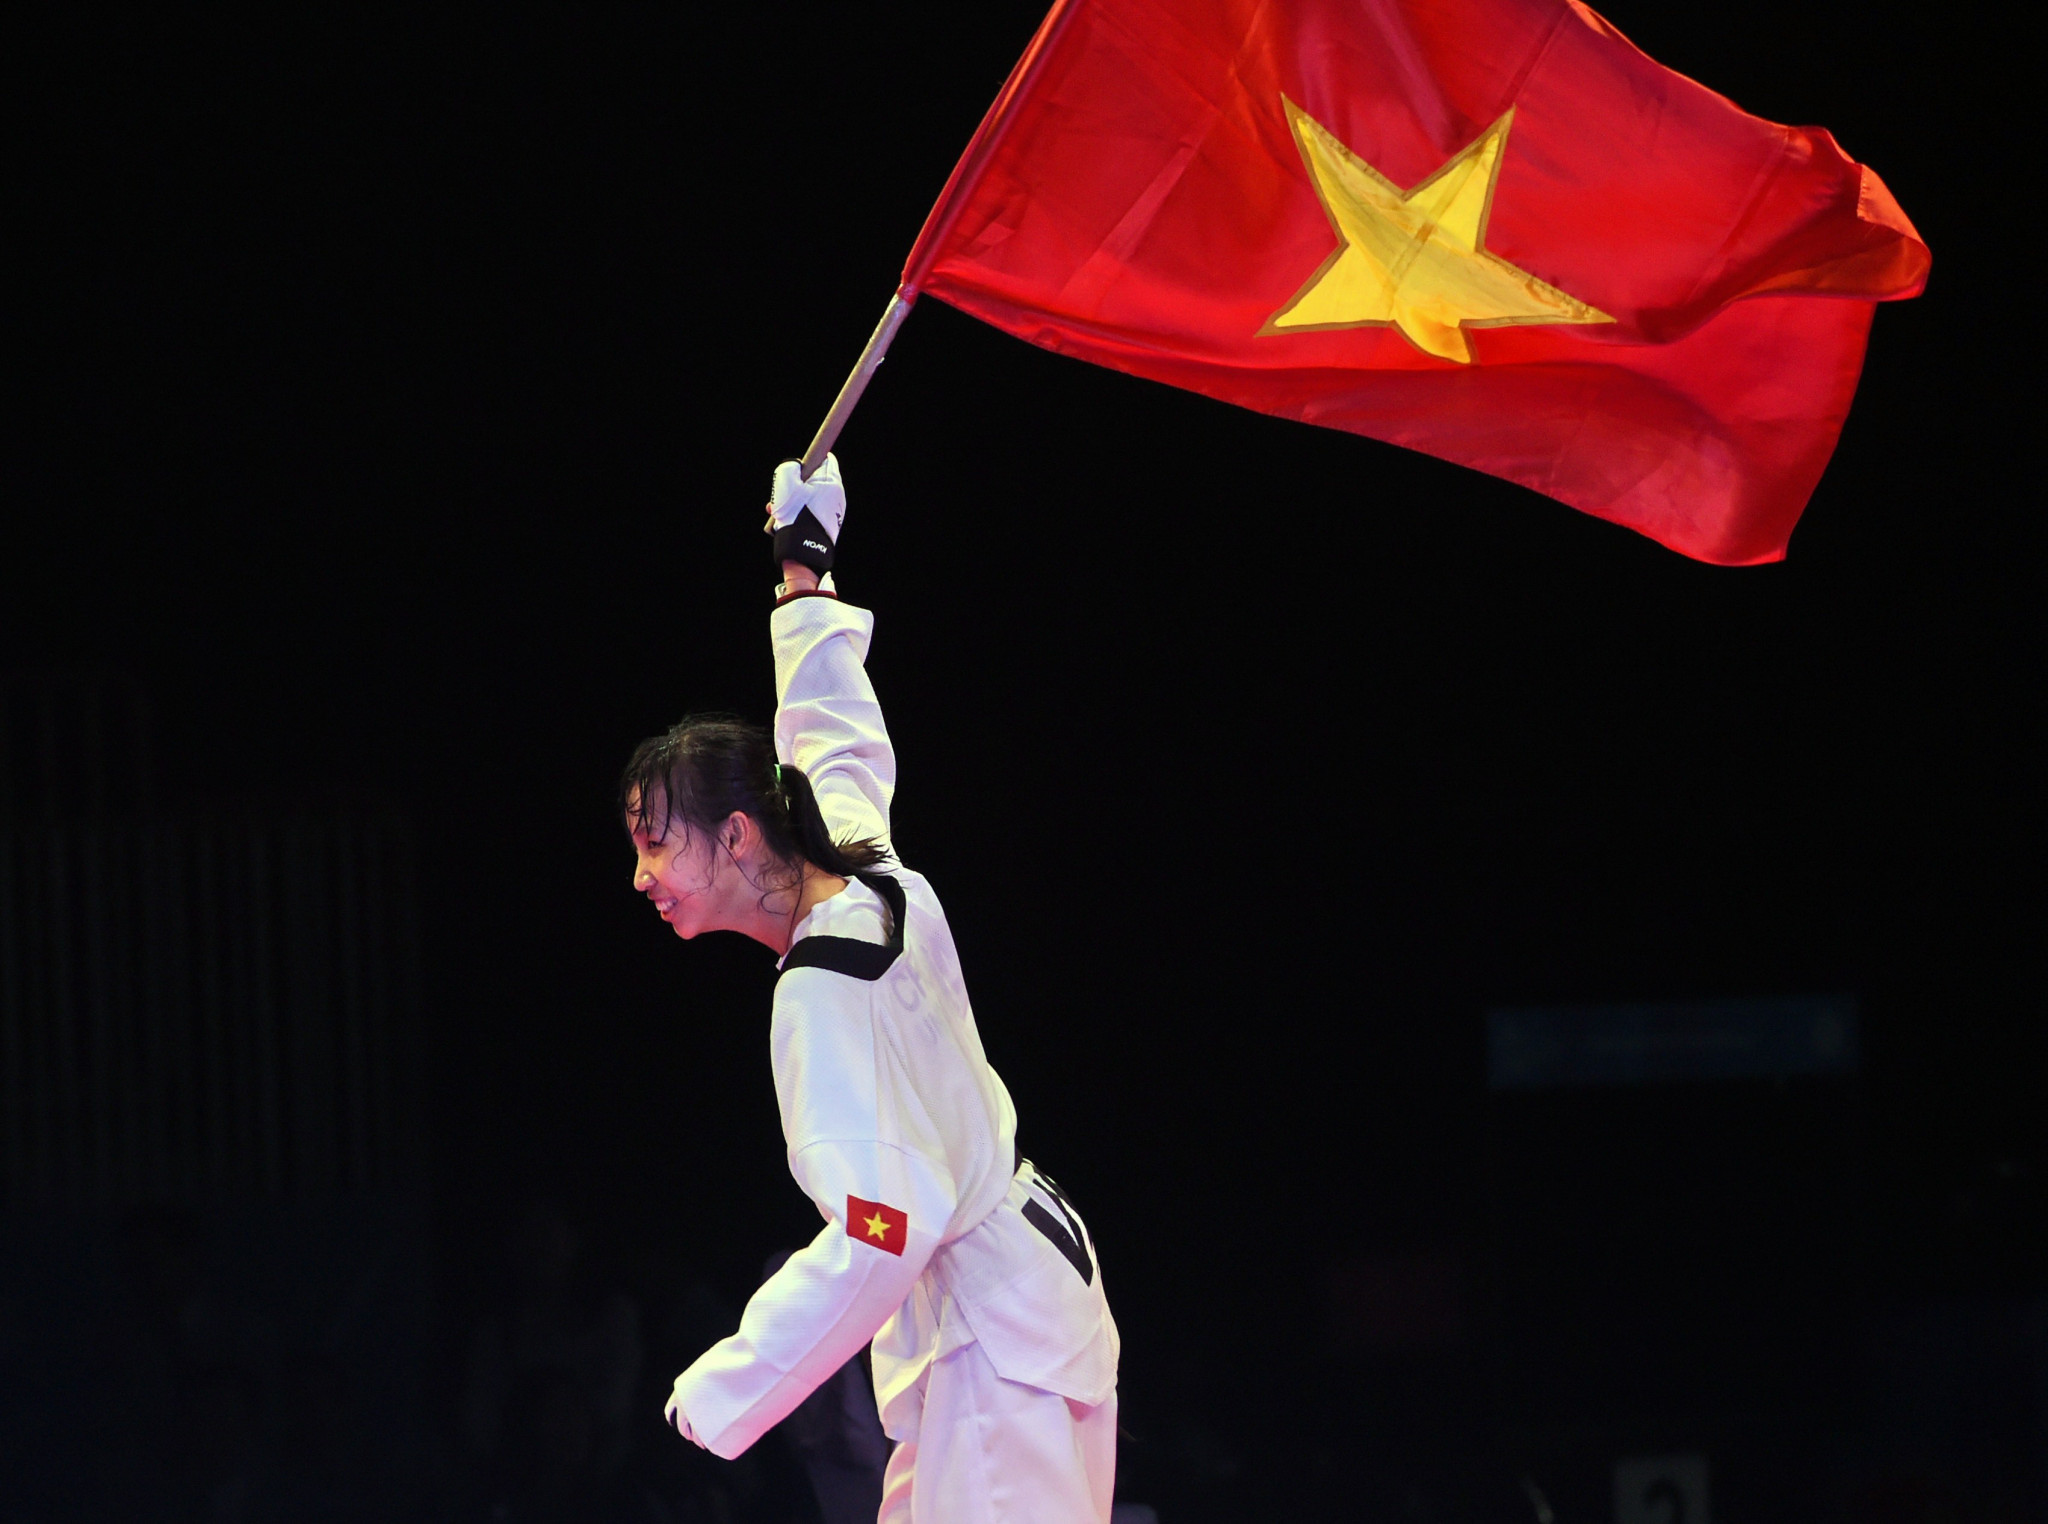 Truong Thi Kim Tuyen is targetting a sport at next year's Olympic Games in Tokyo ©Getty Images